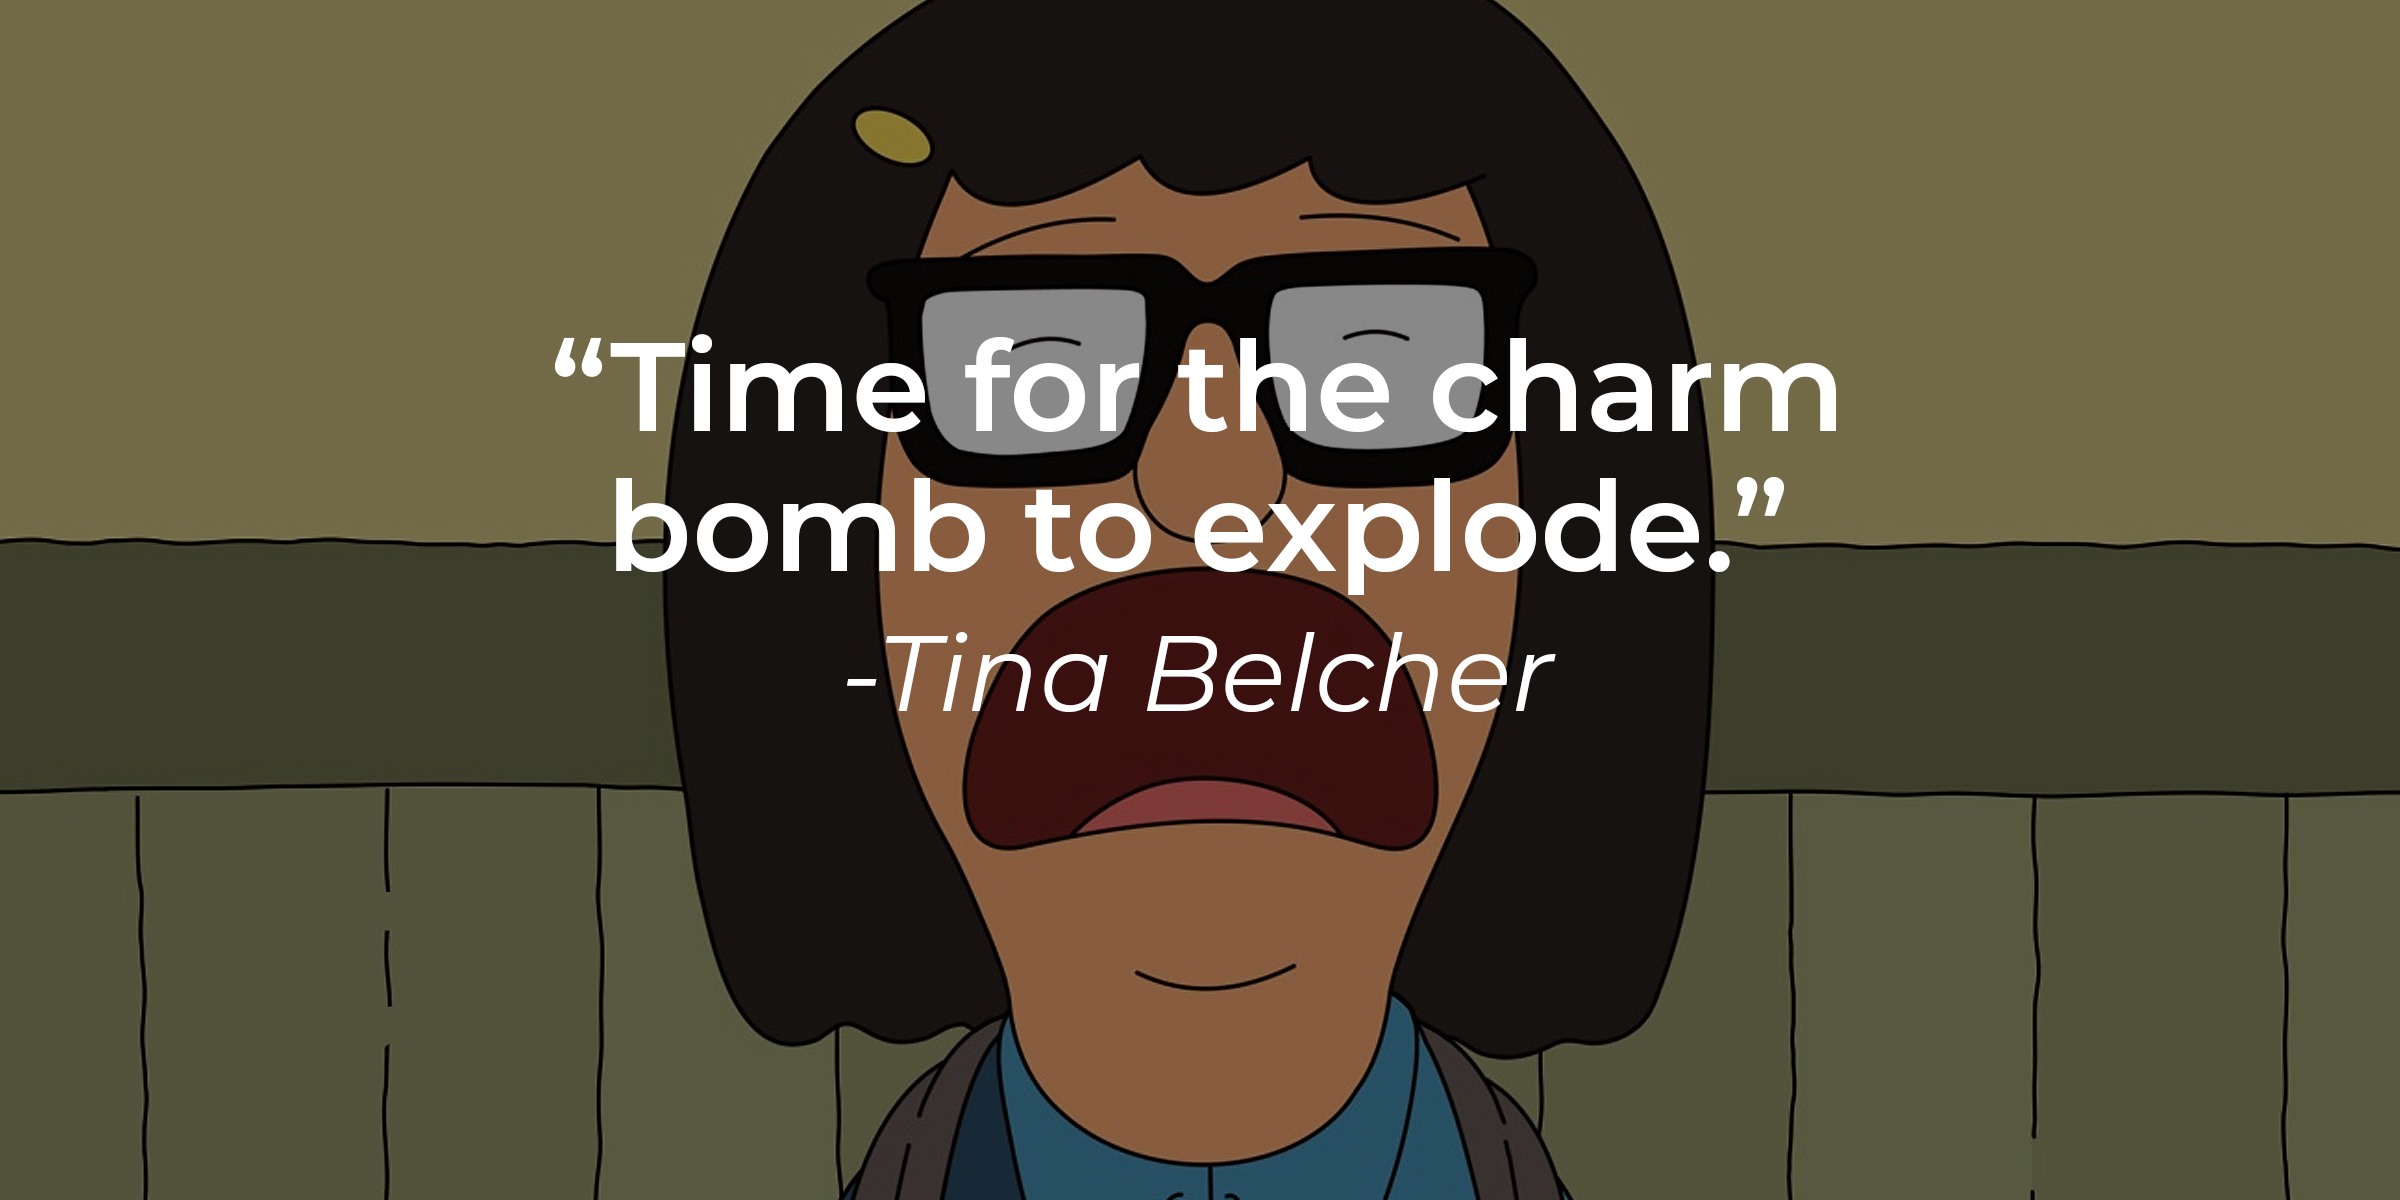 An Image of Tina Belcher with her quote: “Time for the charm bomb to explode.” | Source: Facebook.com/BobsBurgers